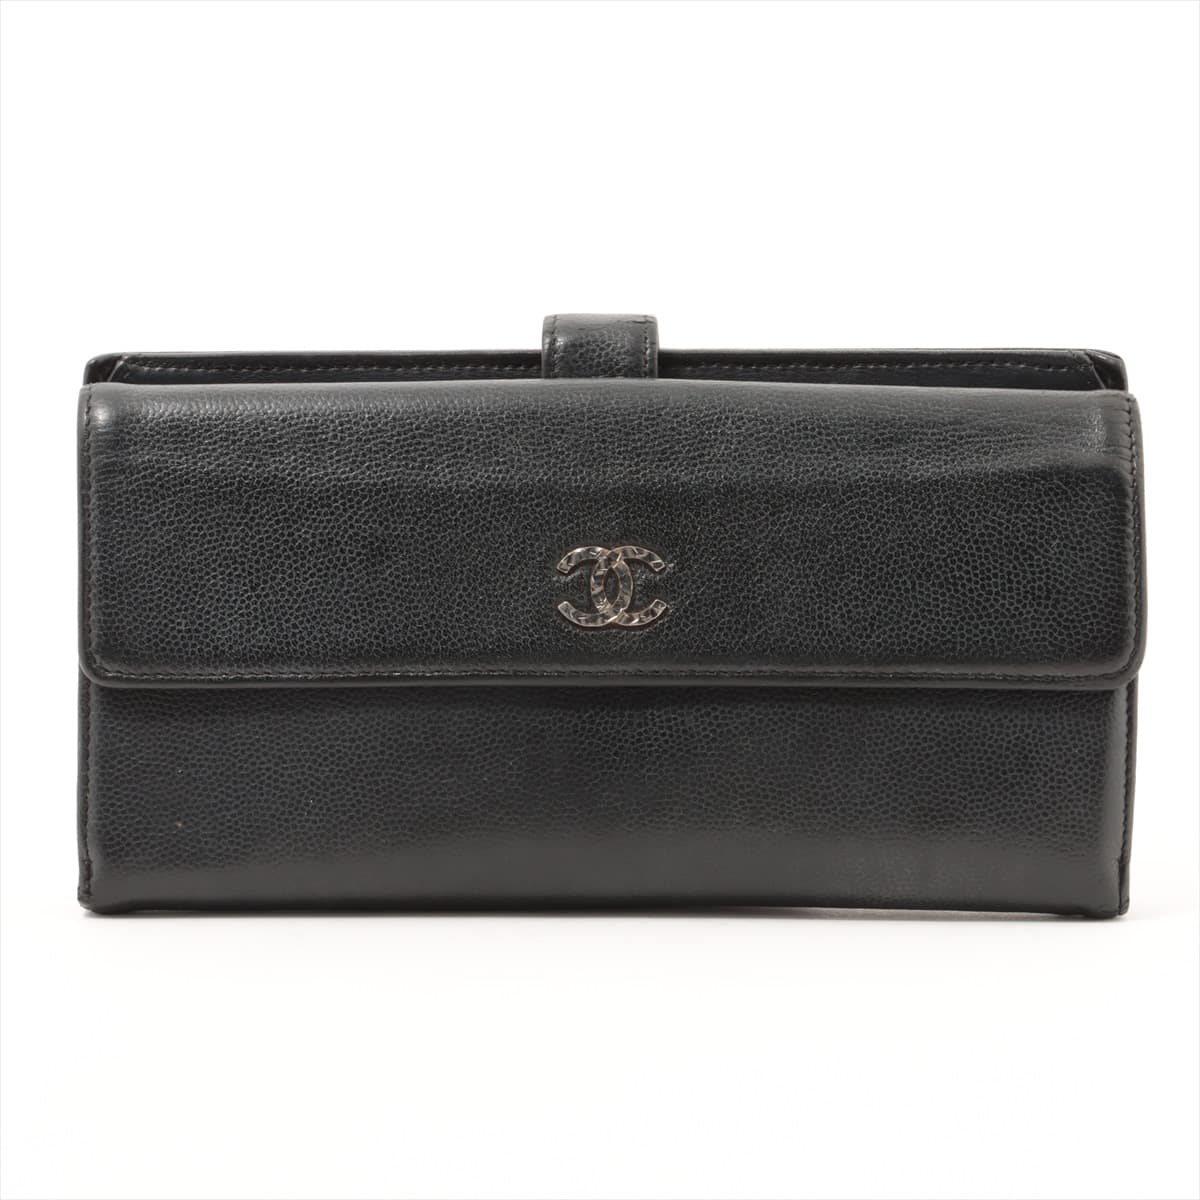 Chanel Coco Mark Leather Wallet Black Silver Metal fittings 13XXXXXX